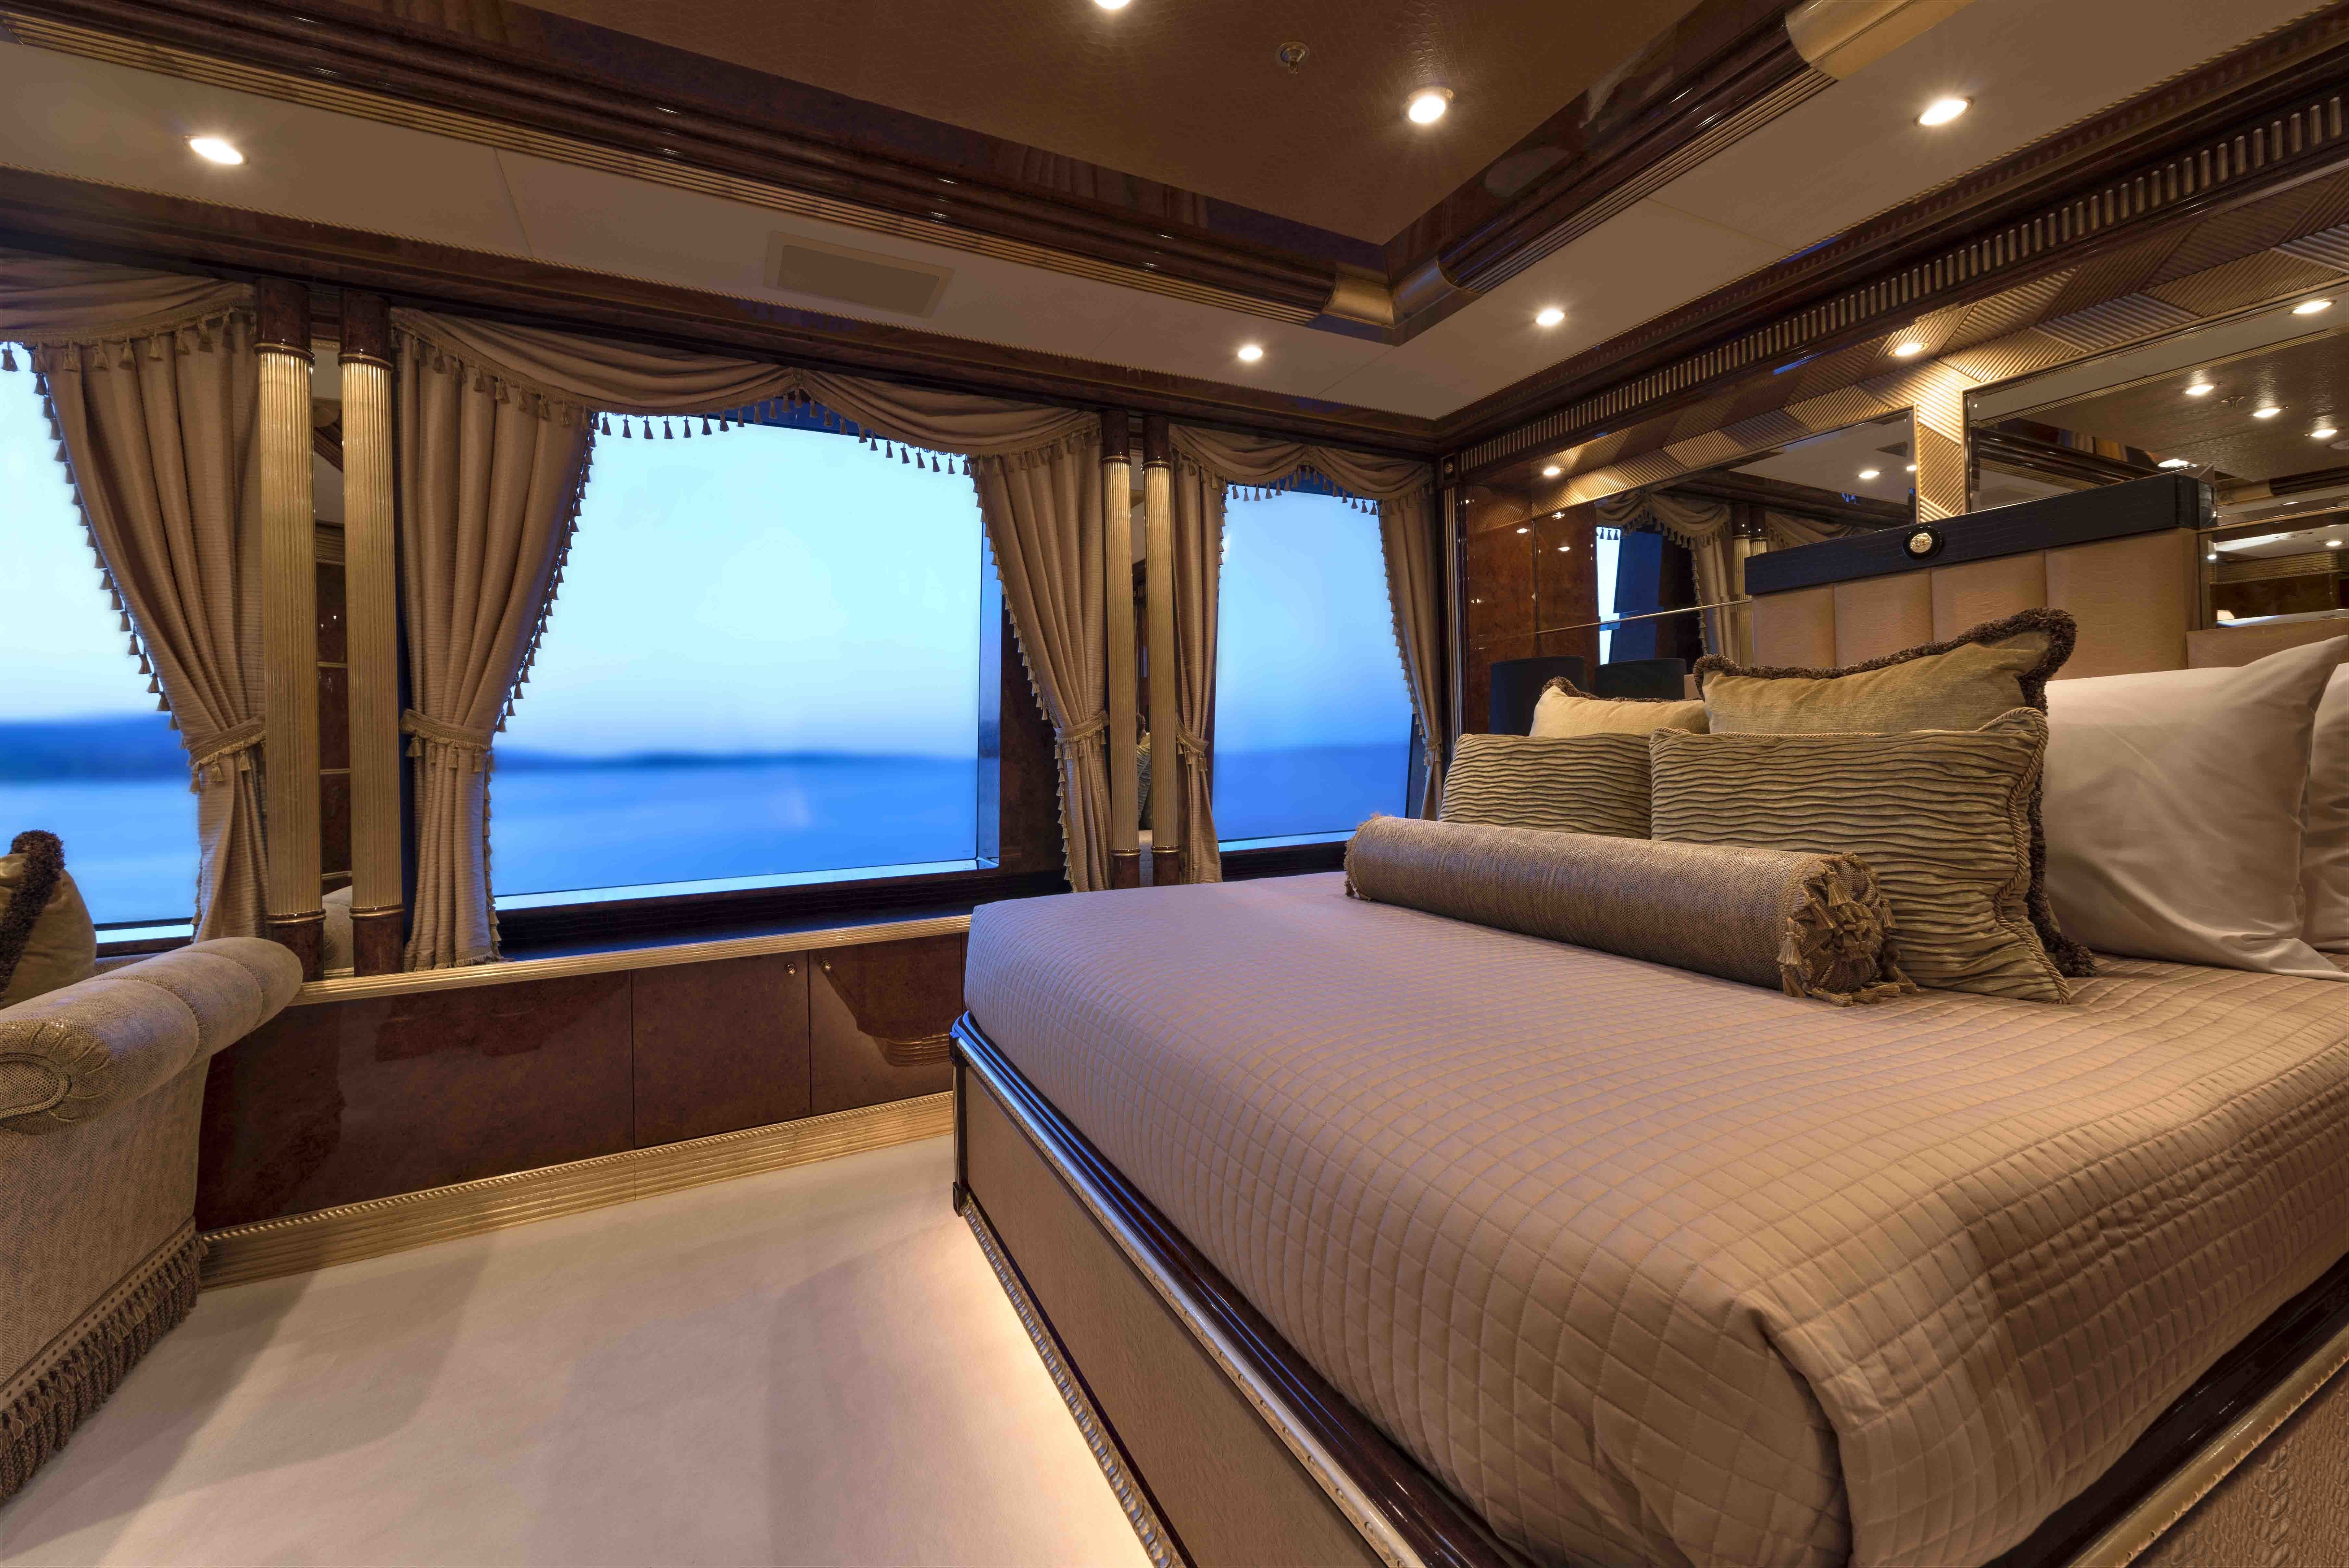 VIP stateroom with fabulous windows and views